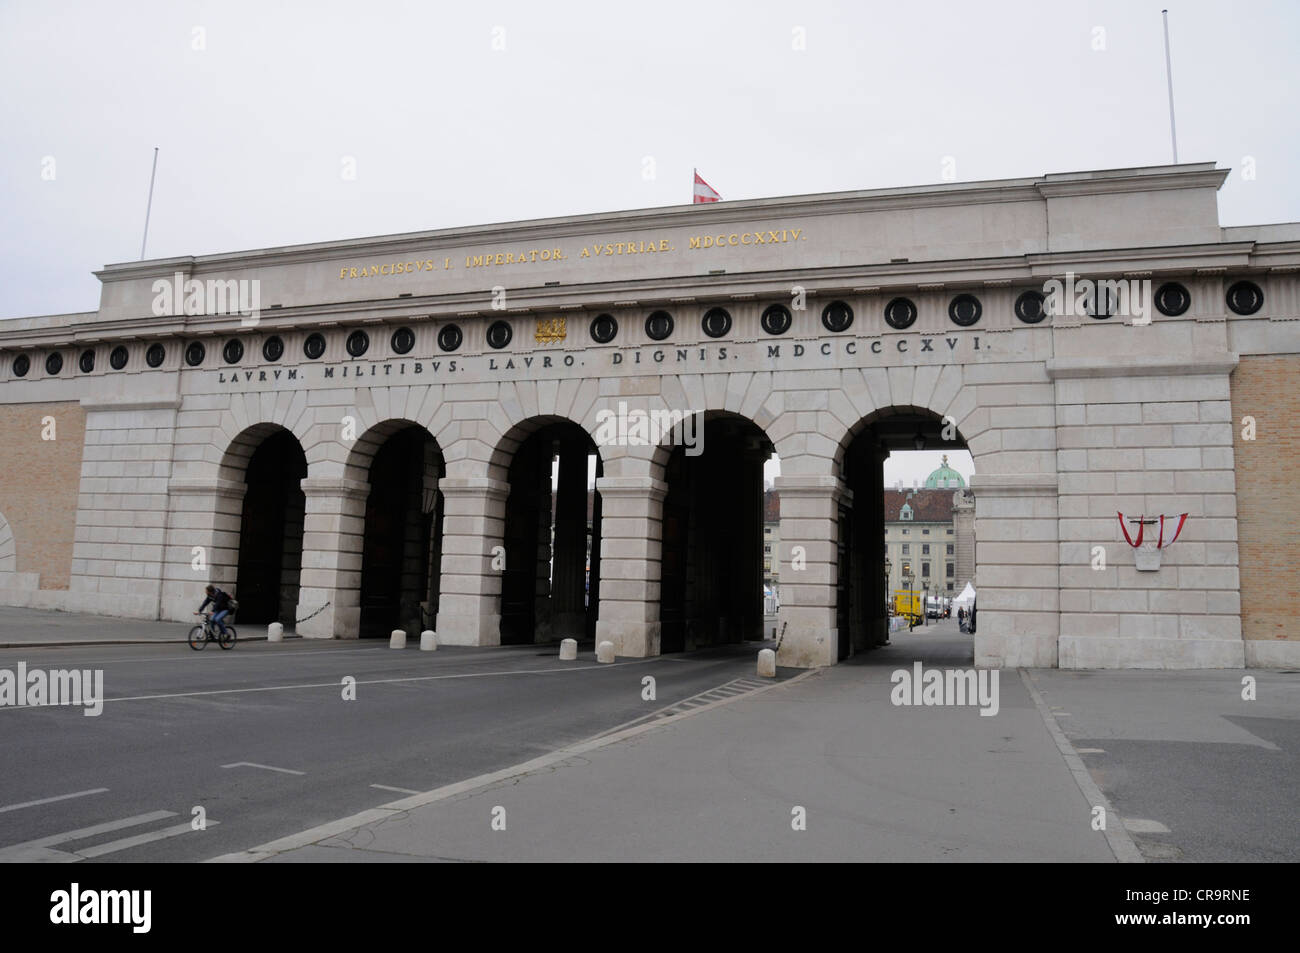 The Neue Borg - New gate with its arches  on the Heidenplatz, is the newest part of the Imperial Palace,(Hofburg Palace) built in the 19th century in Stock Photo